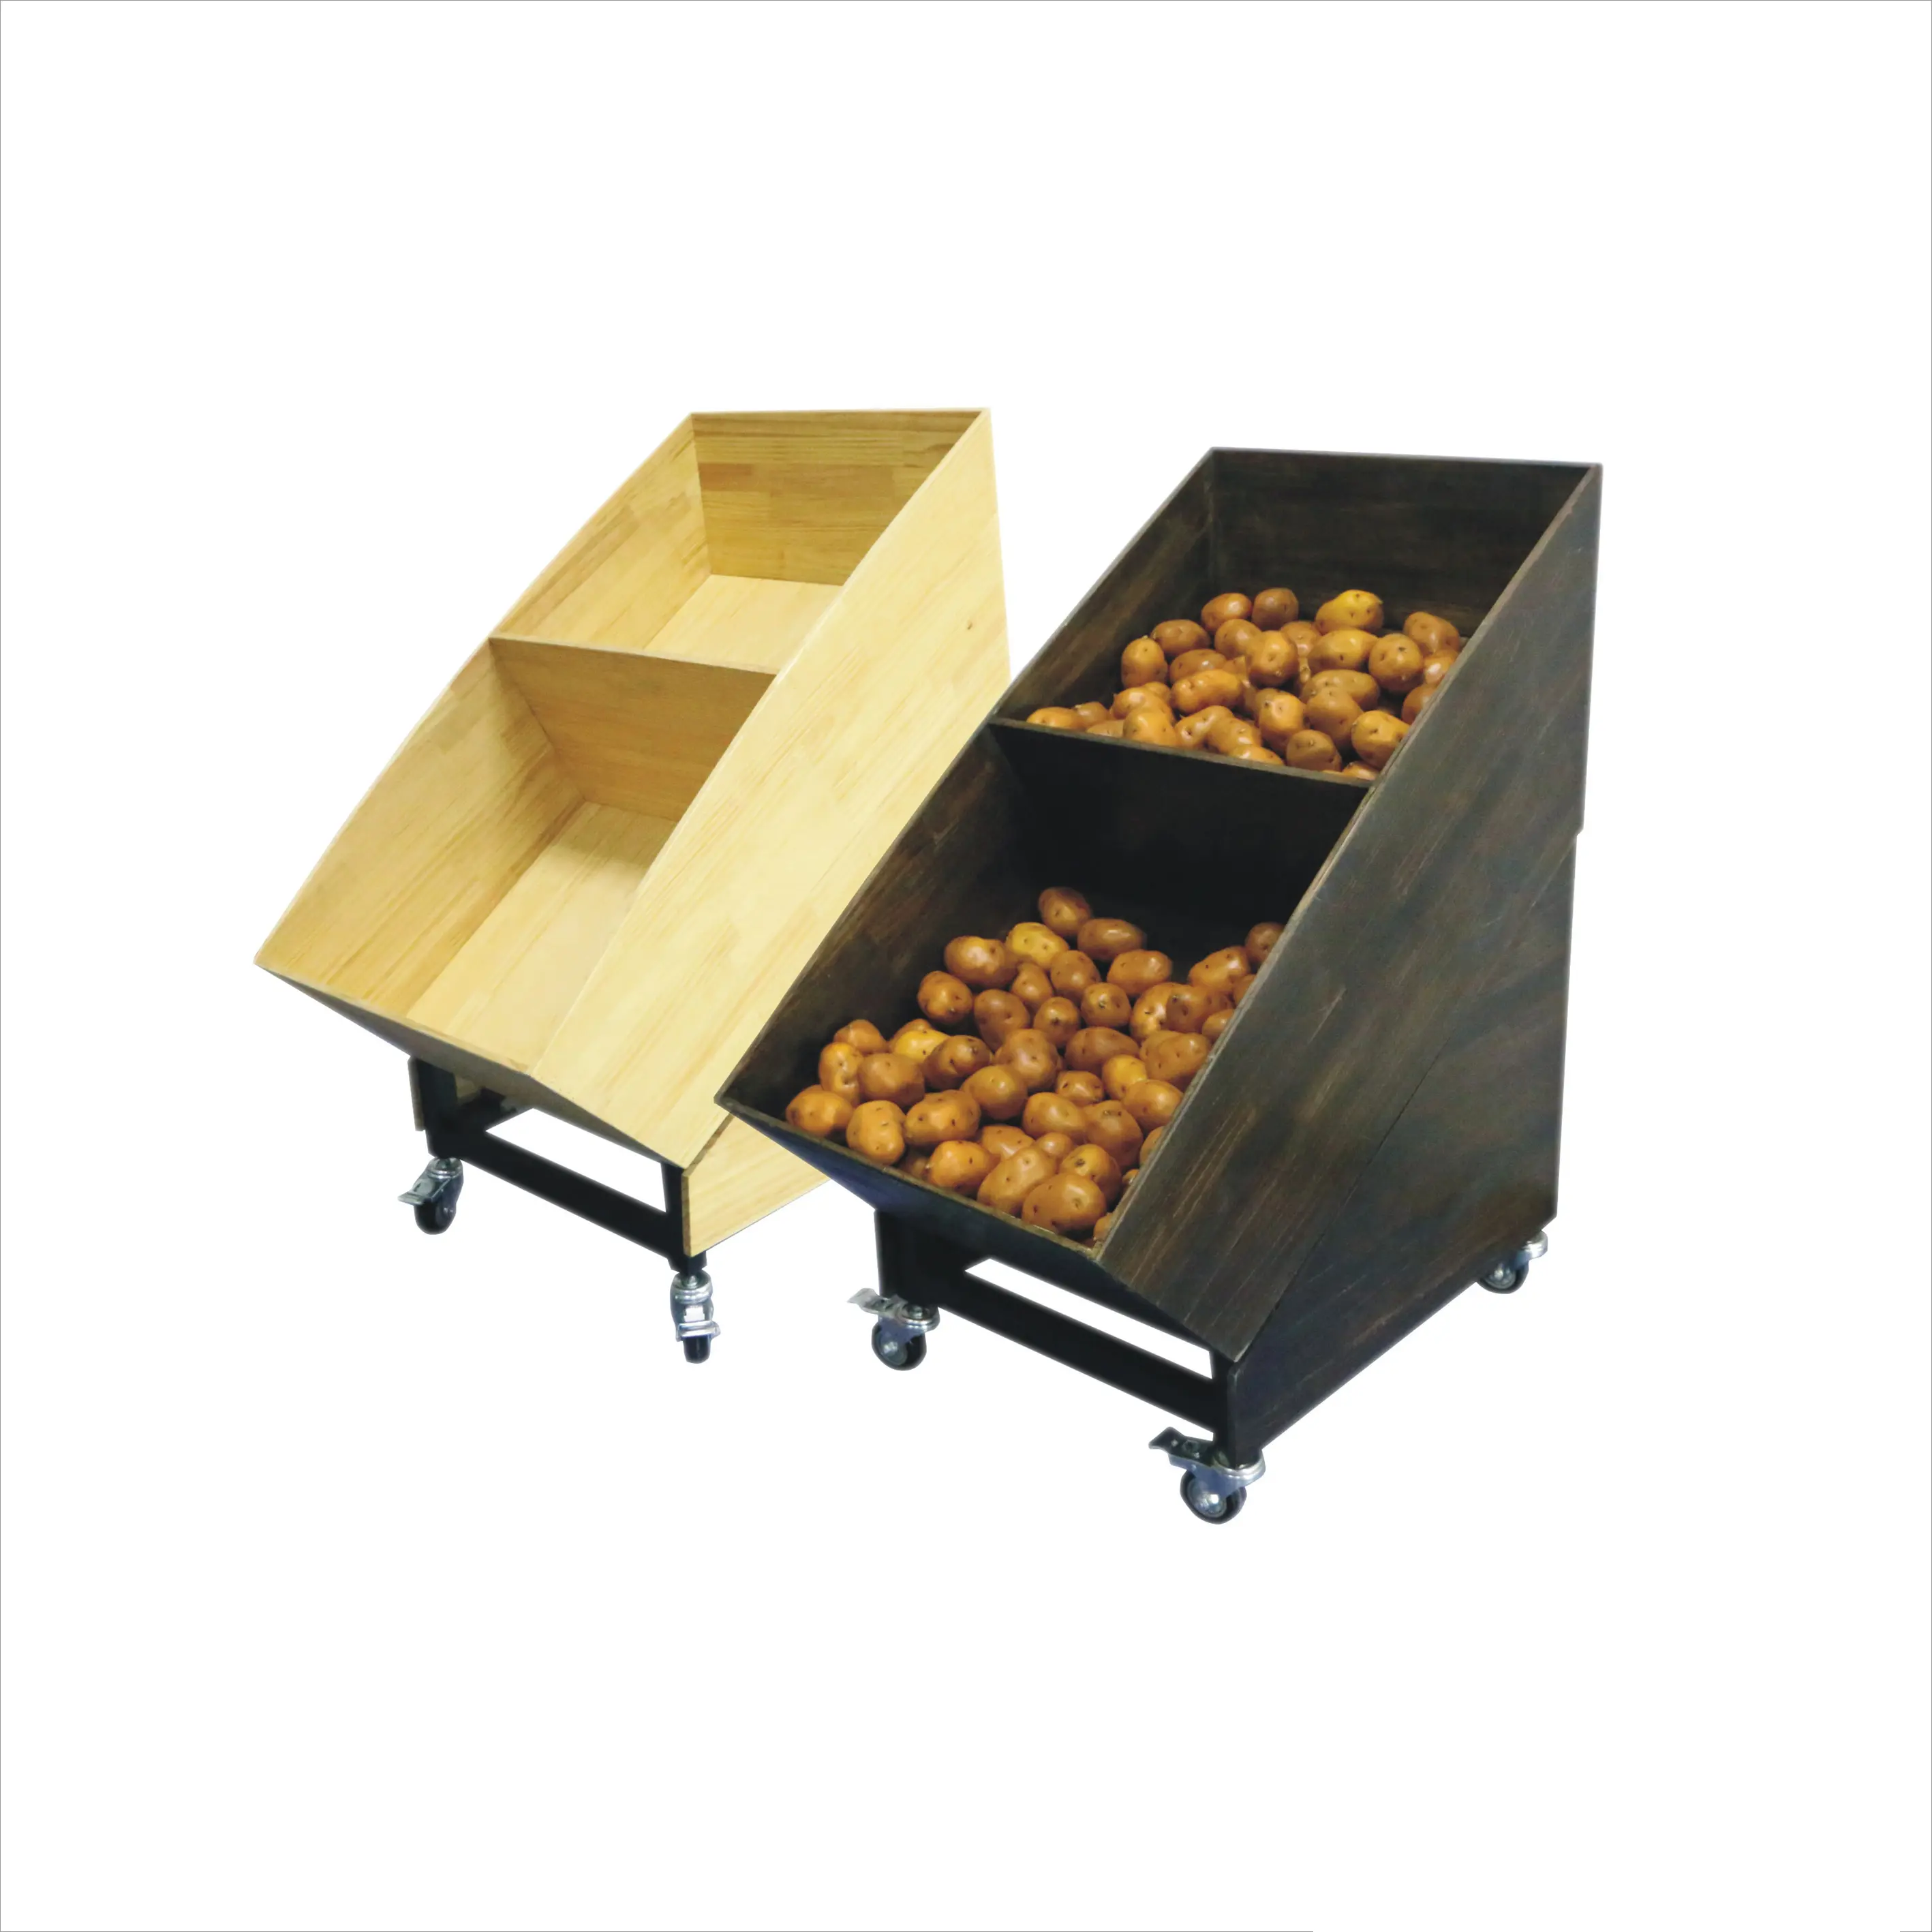 Fruit And Vegetable Display Stand Wooden Fruit And Vegetable Shelf Rack Display Stands With Wheel For Supermarket